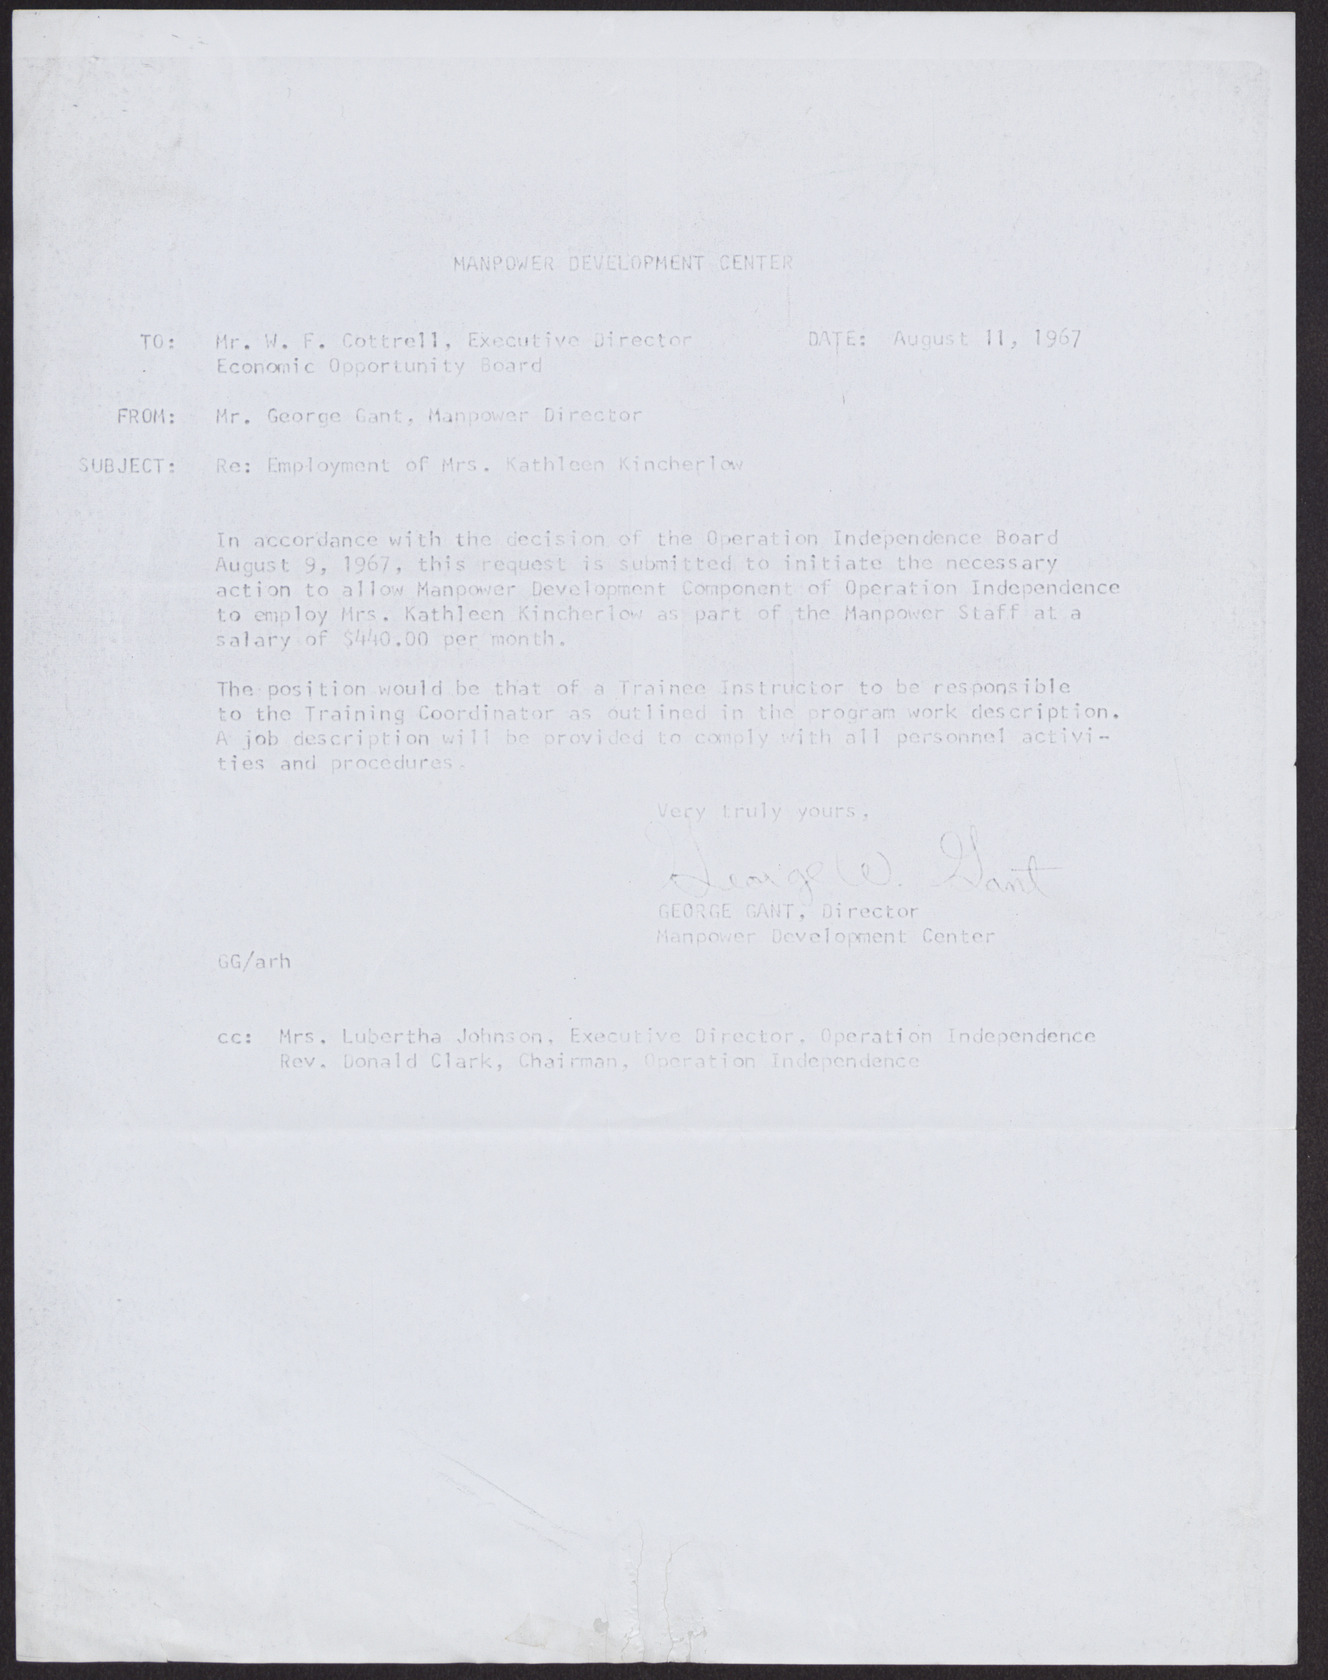 Copy of a letter to Mr. W. F. Cottrell from George Gant, August 11, 1967